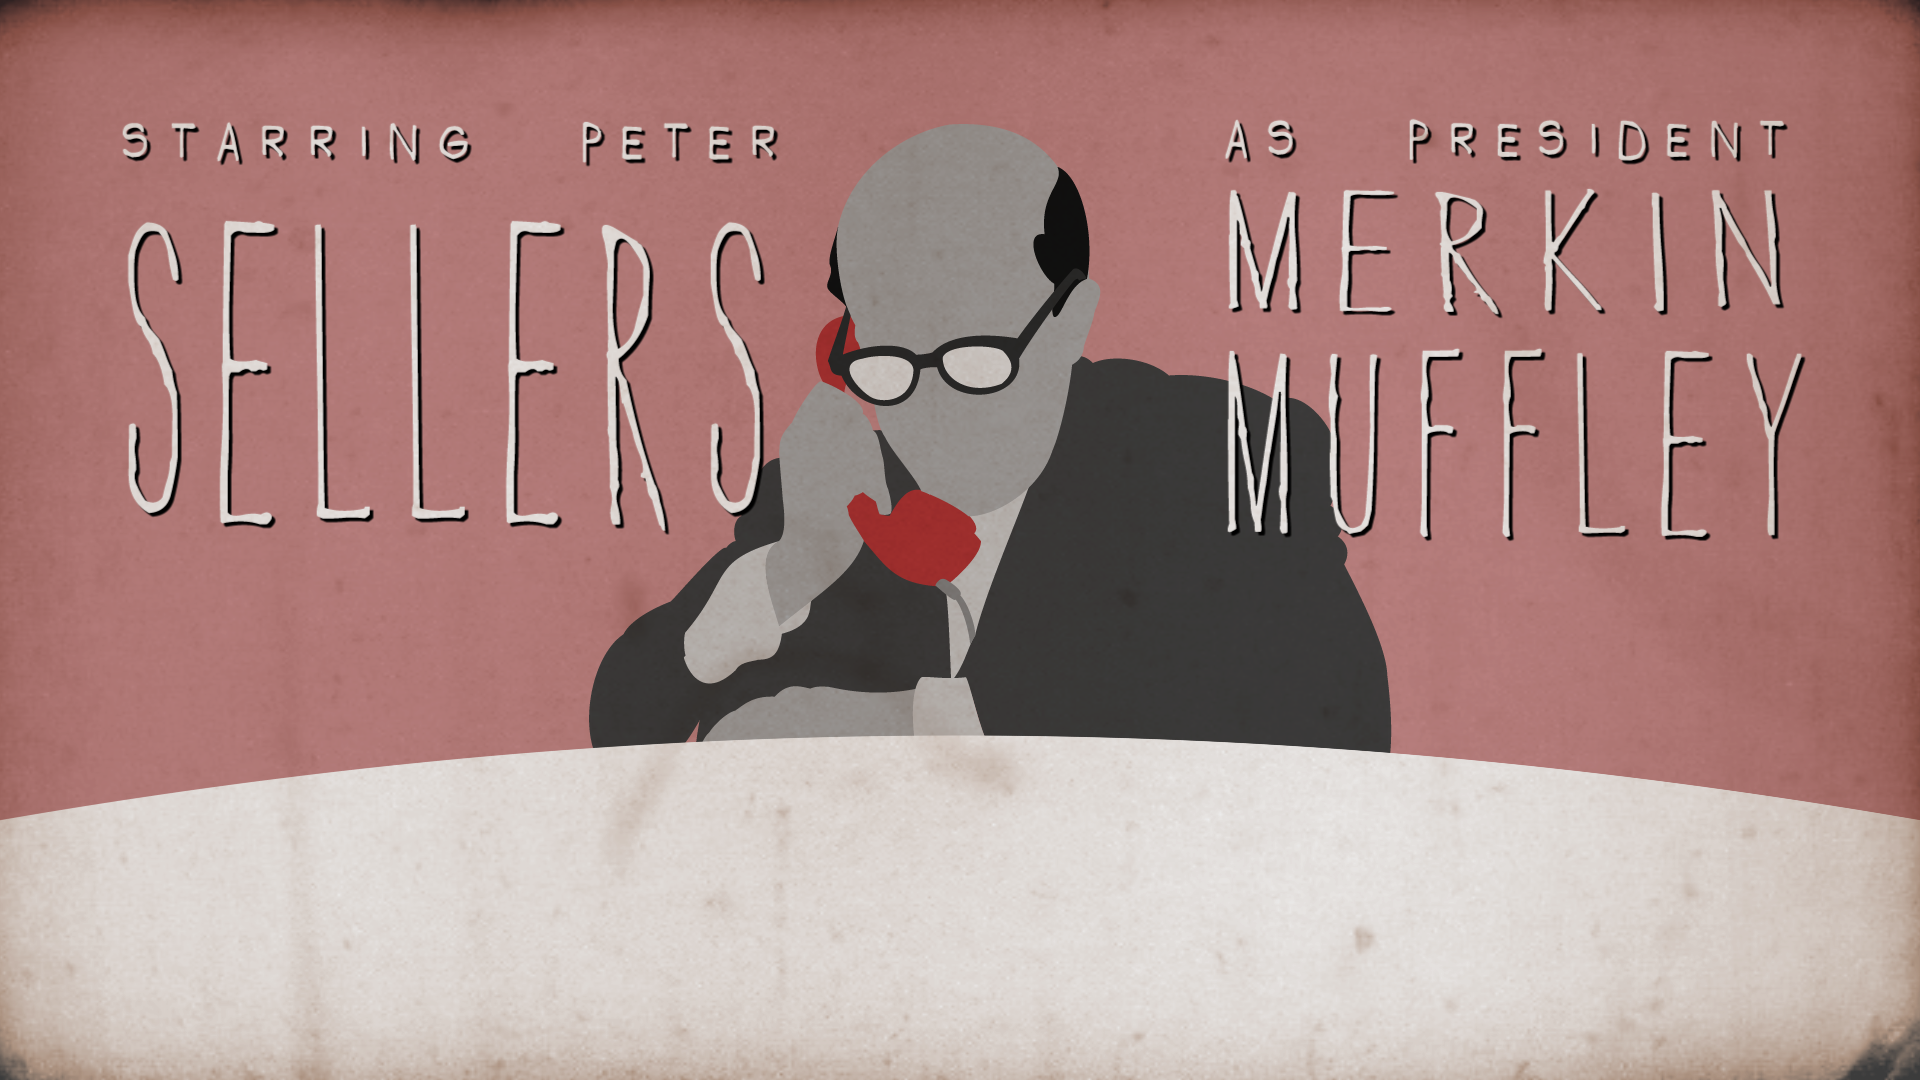 Screenshot of an animated intro to Dr. Strangelove. A half-bald man in a suit sits on a round table holding a red phone to his ear. Next to him the text: 'Starring Peter Sellers As President Merkin Muffley'. The image has a red background and some film grain on top of it.